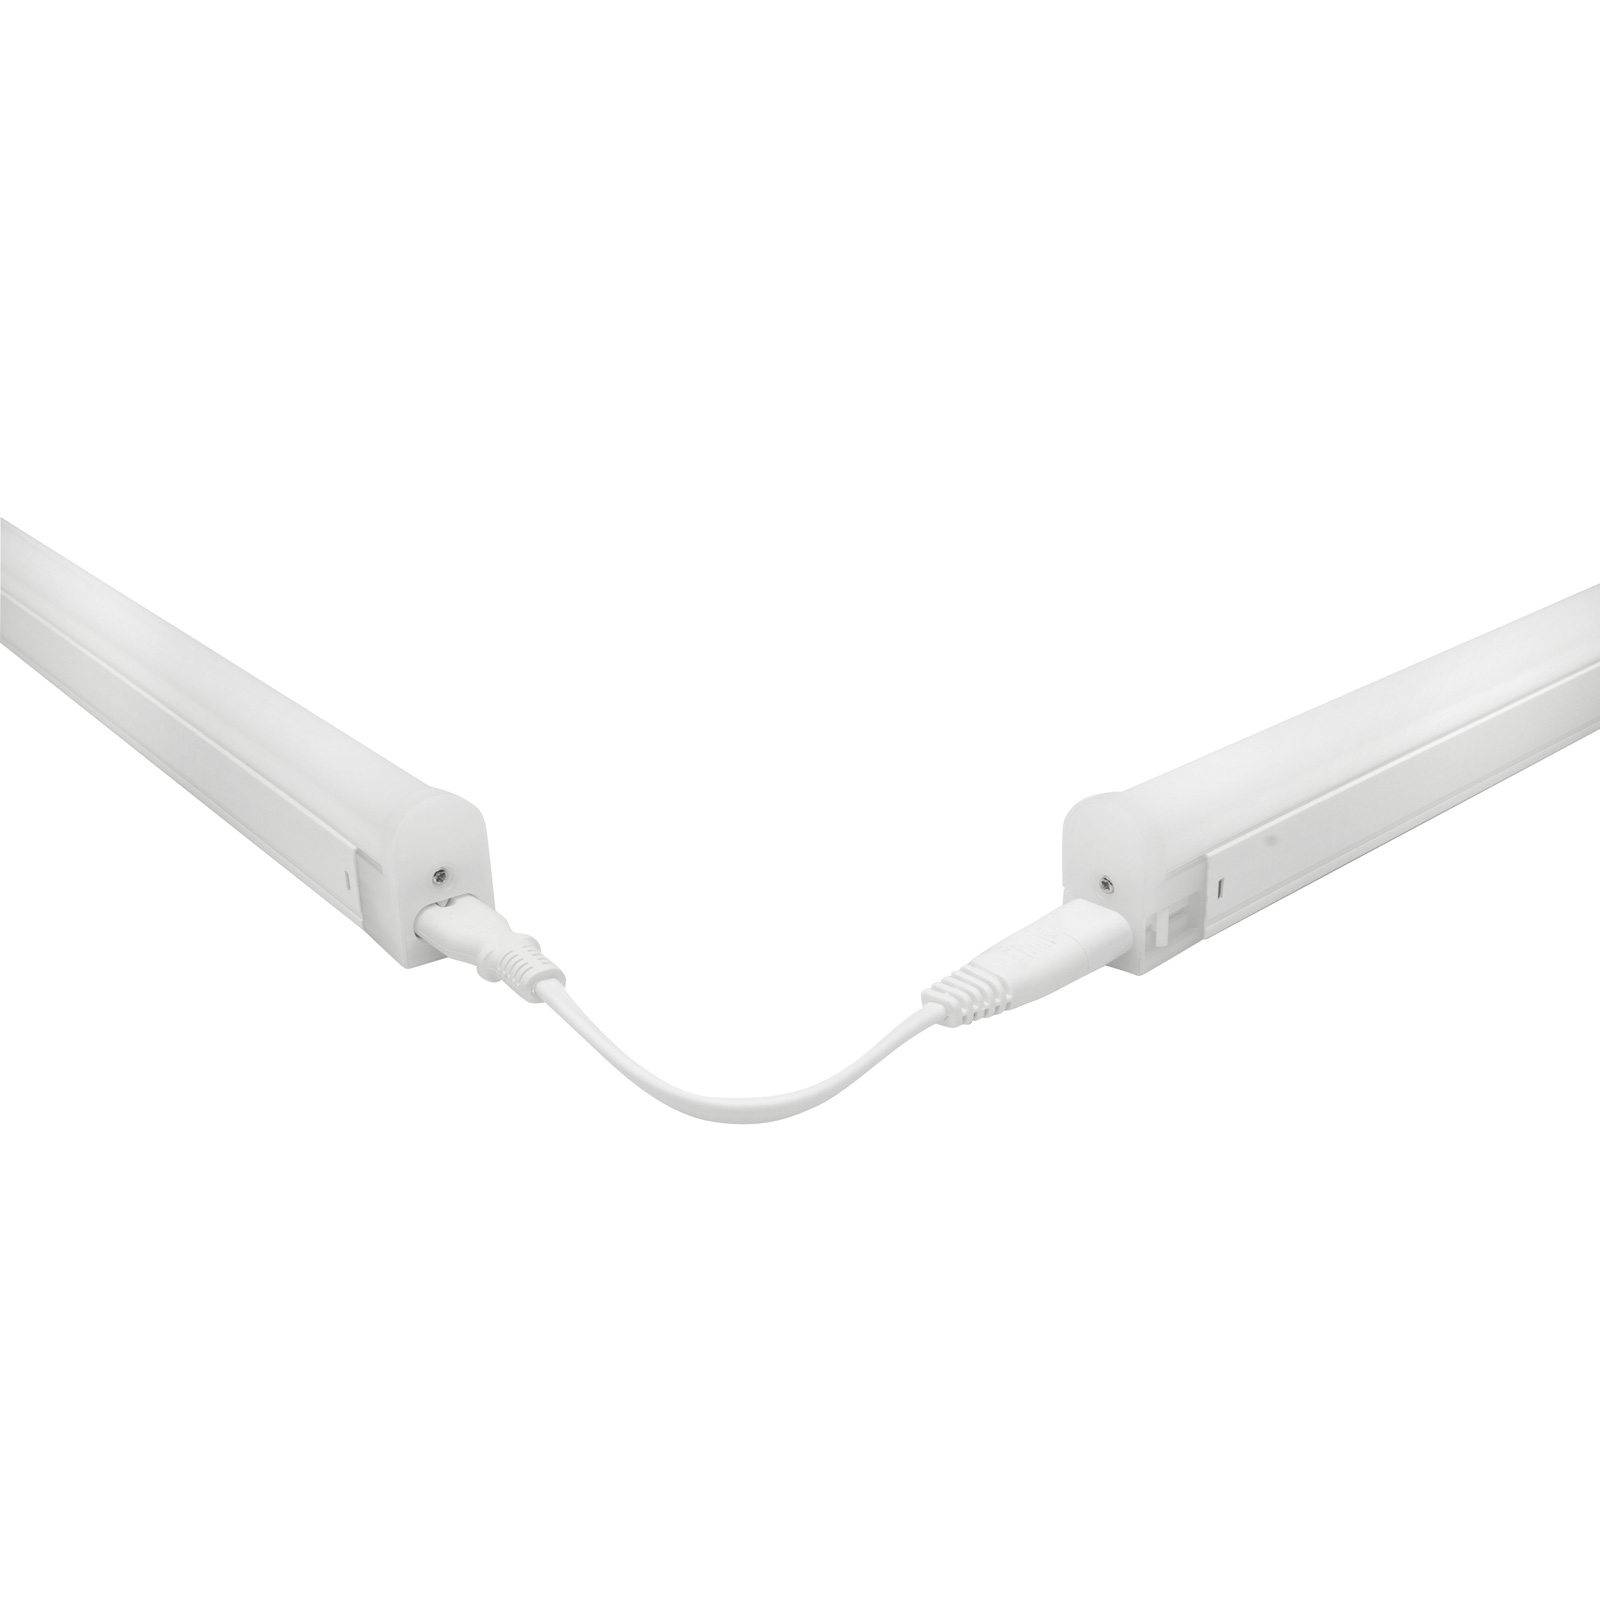 Connection cable for LED under-cabinet light Pino